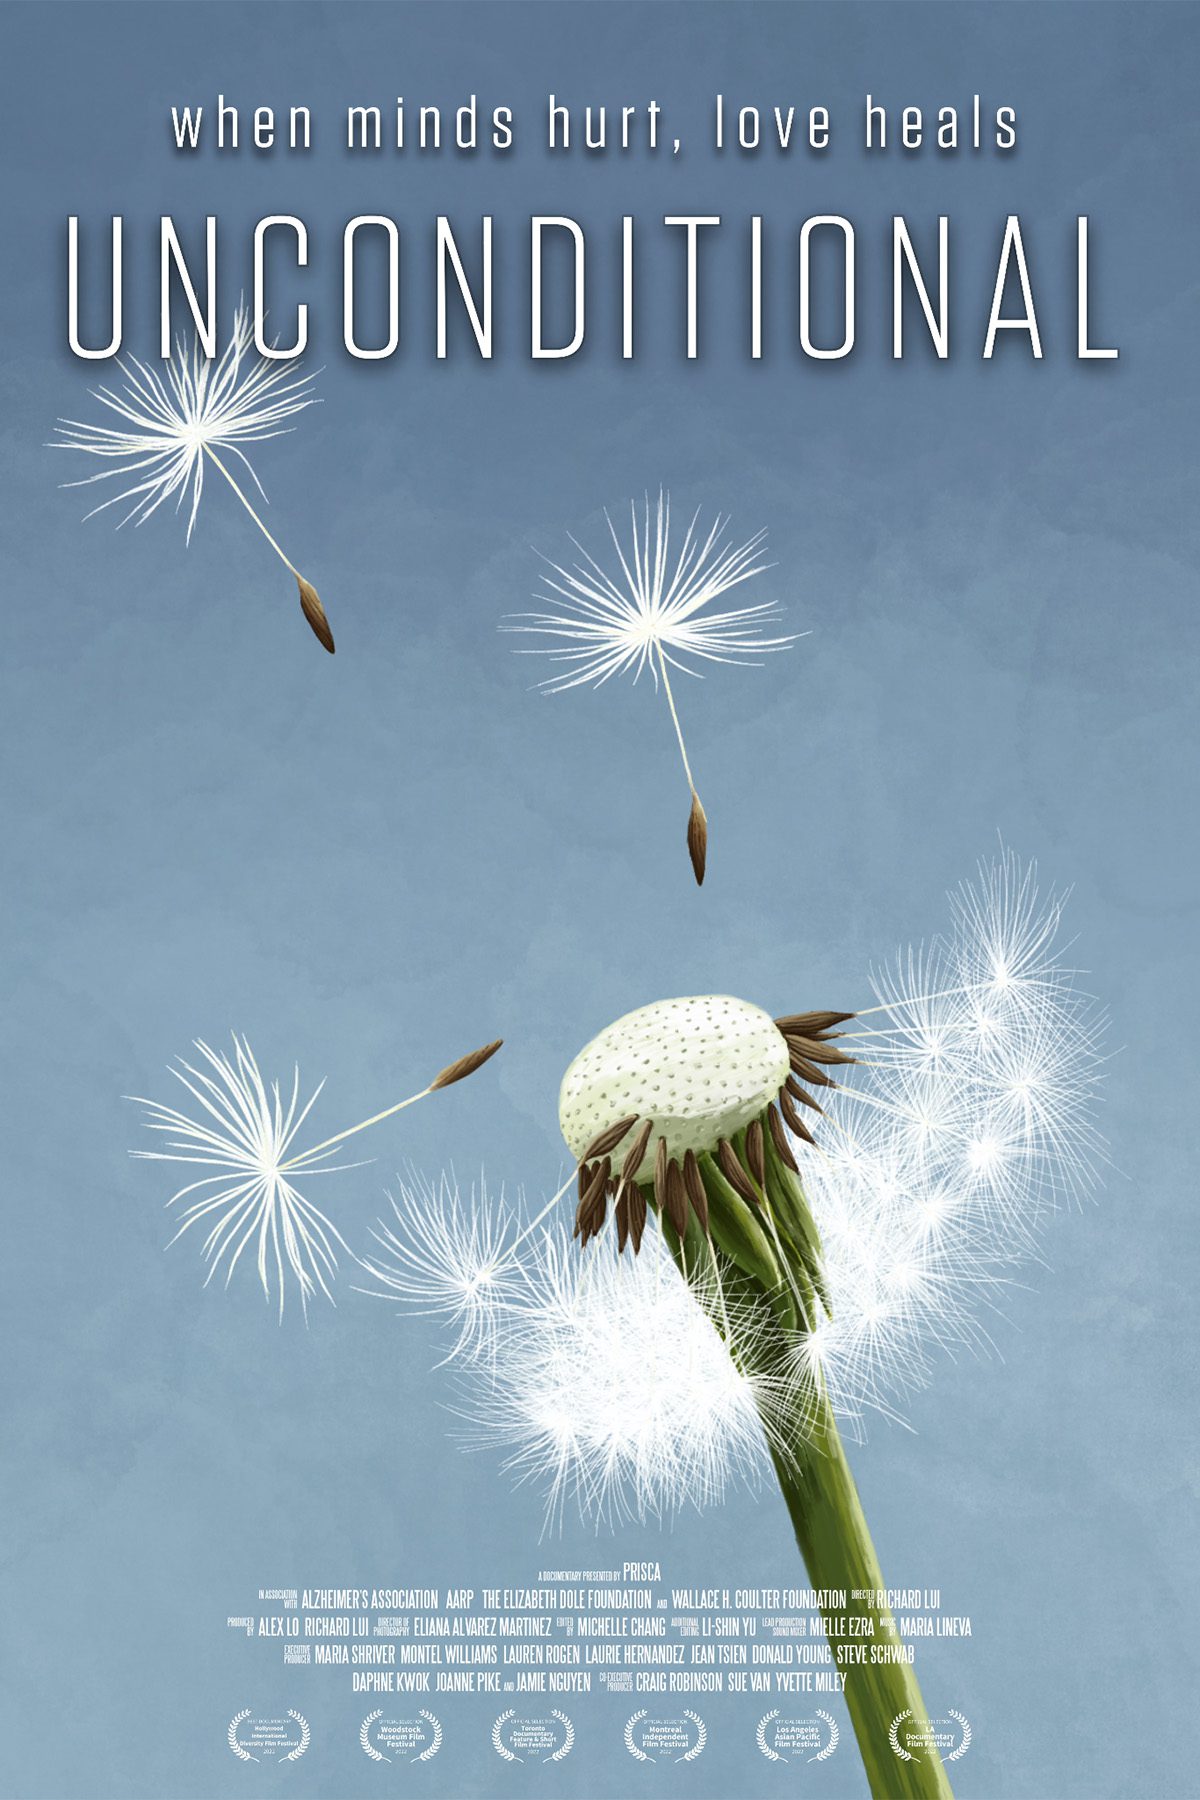 Poster for Richard Lui's documentary film "Unconditional"